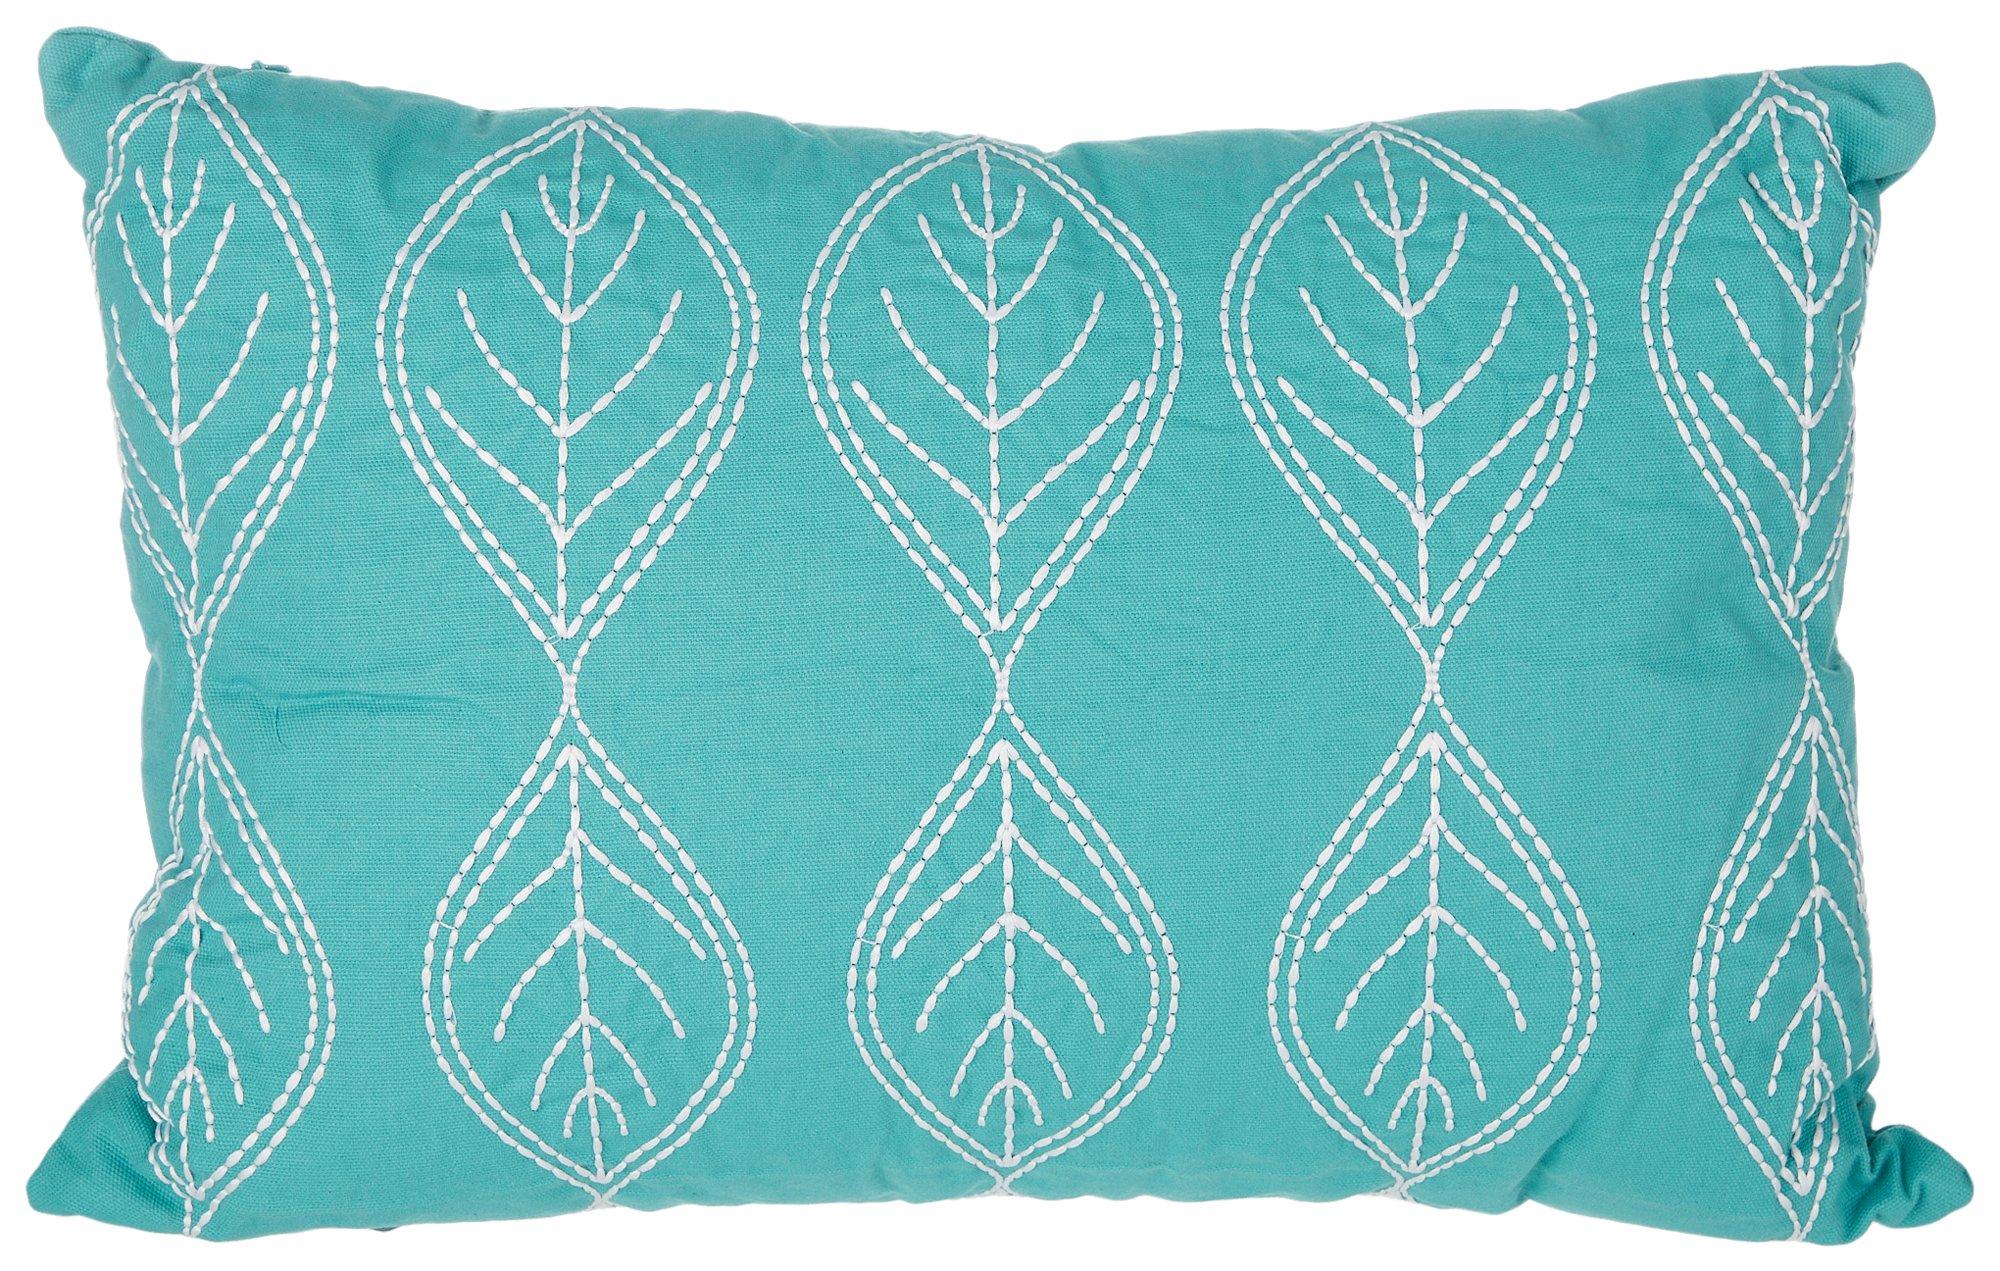 14x20 Stitched Leaves Decorative Pillow